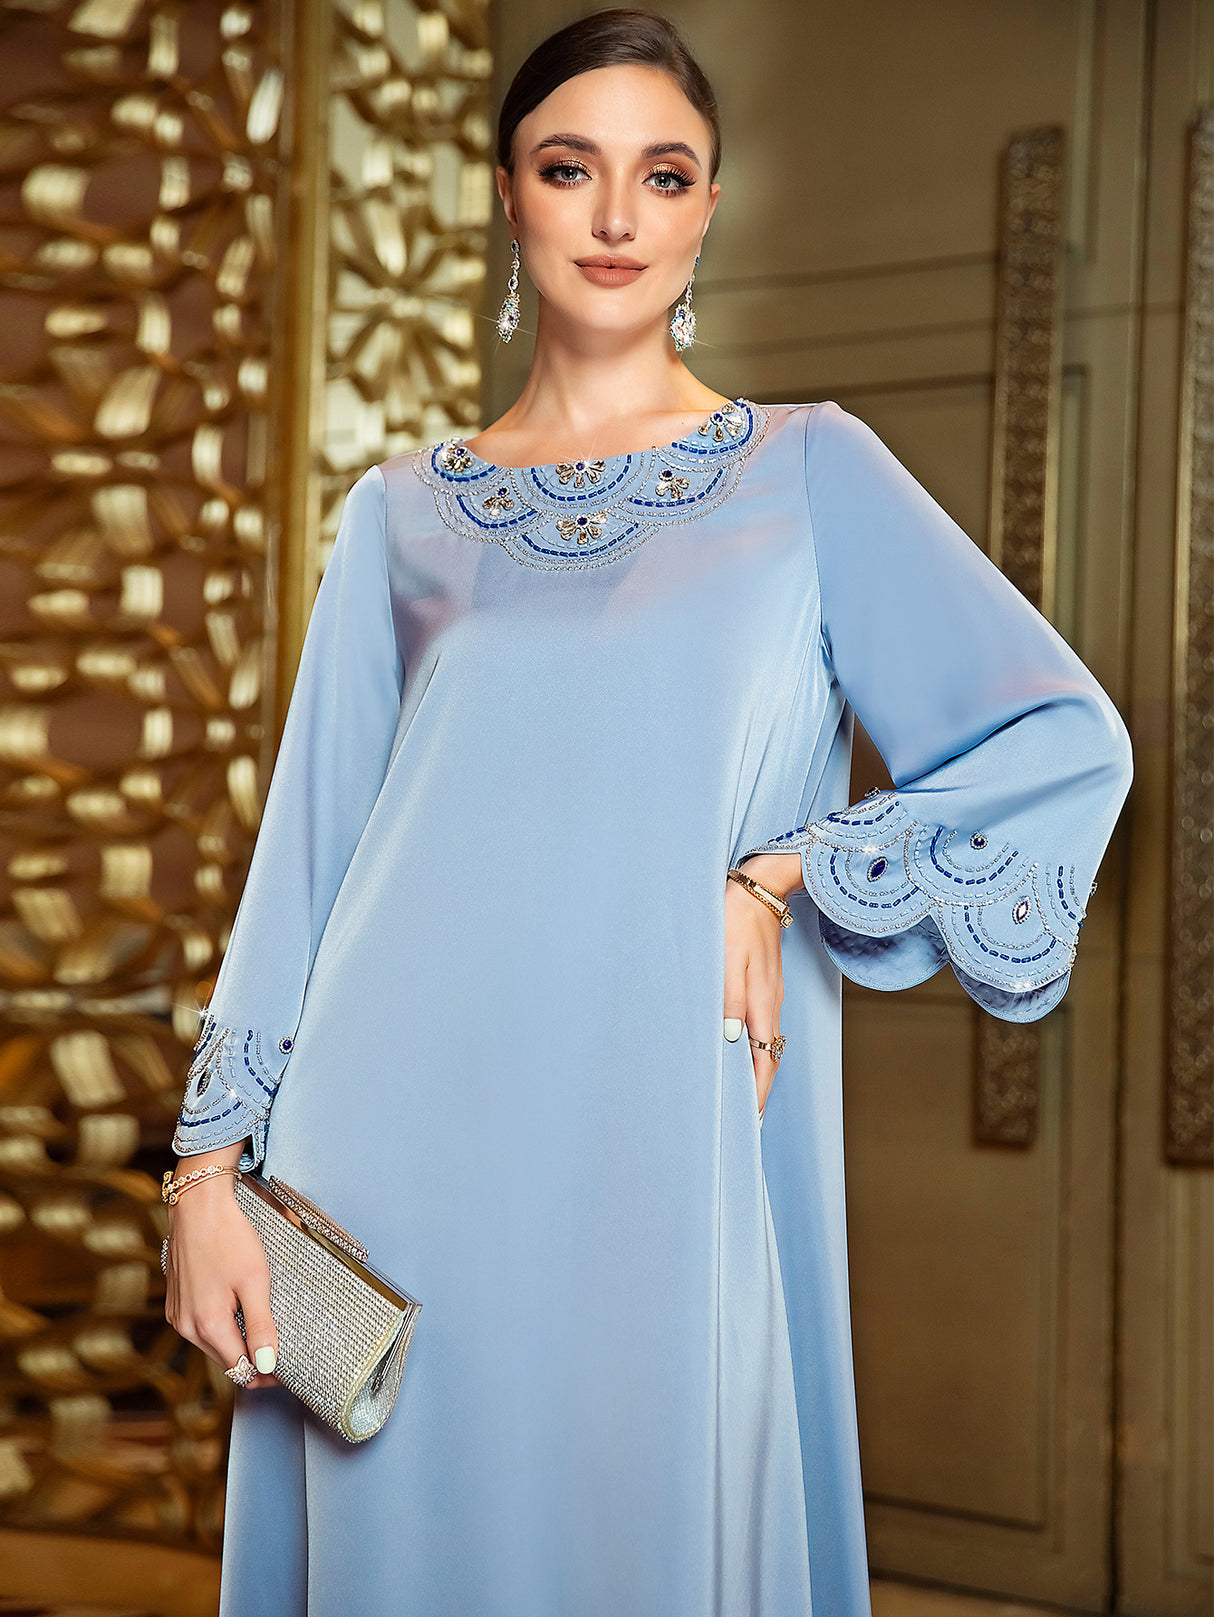 soft light blue galabia studded with crystal in half circles shapes